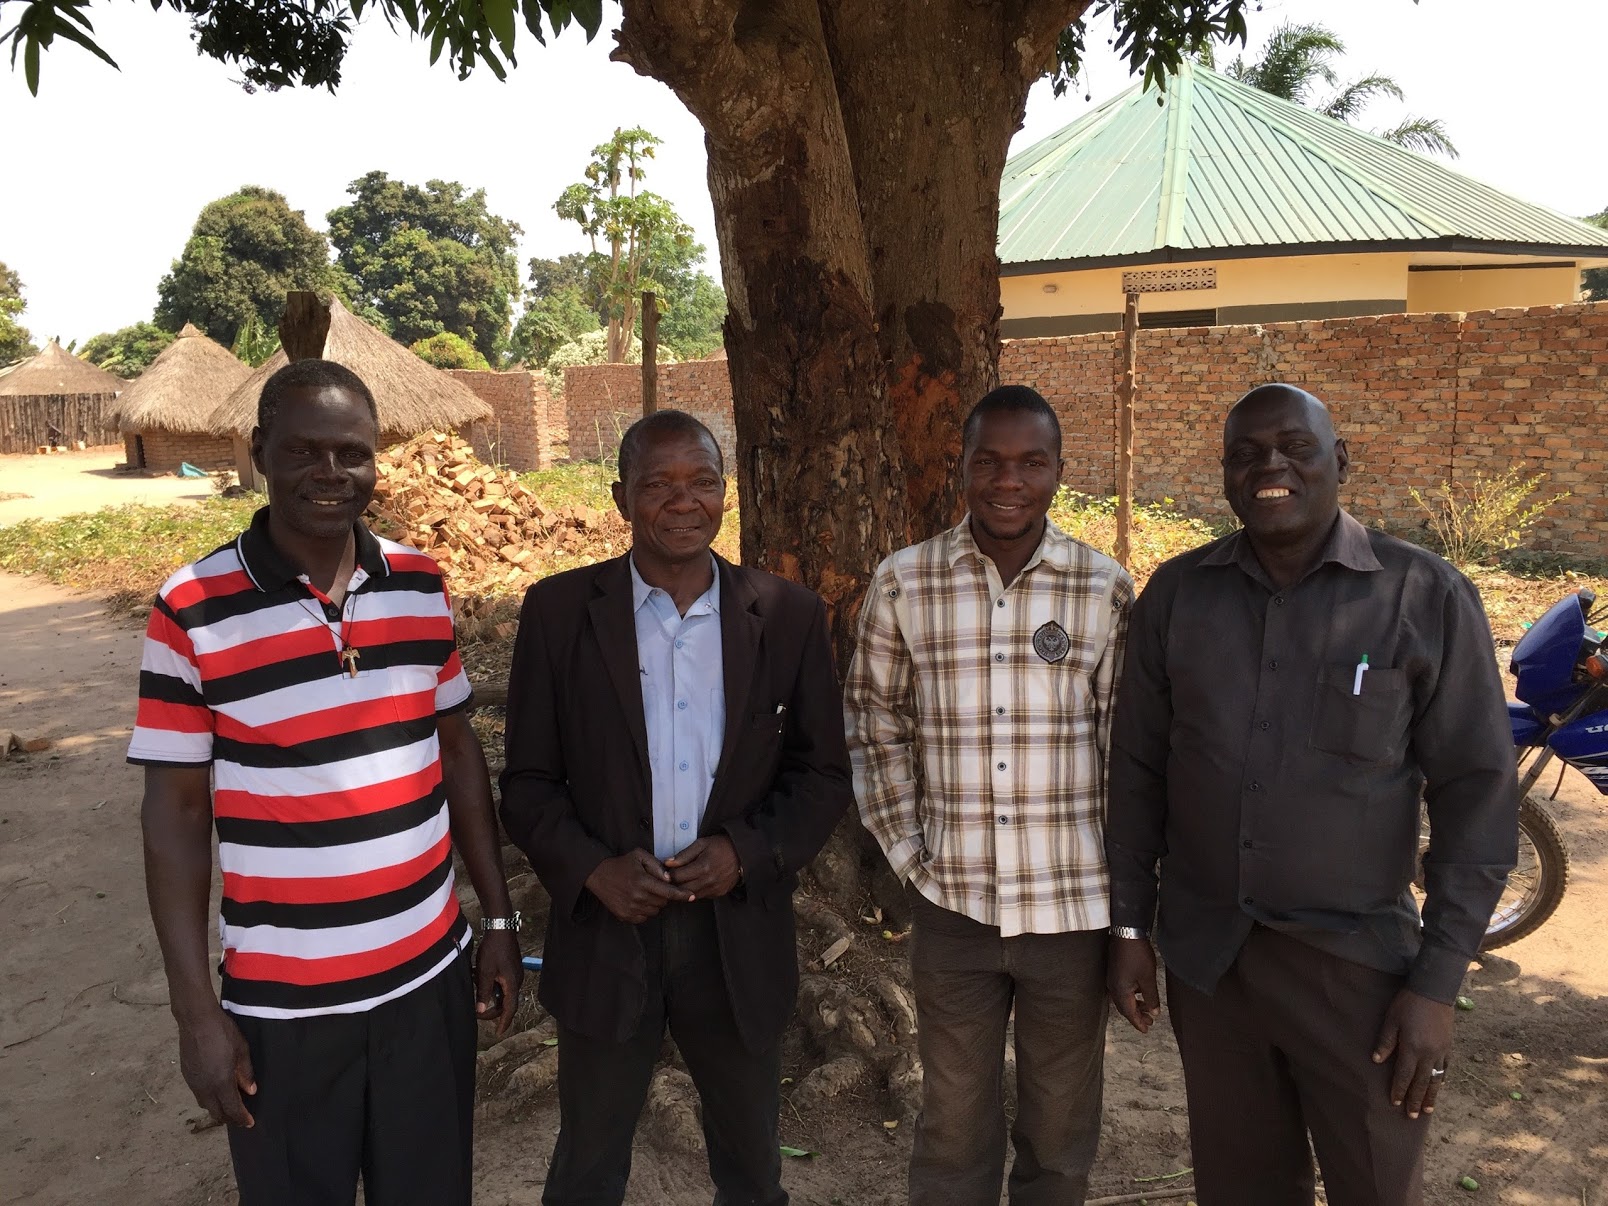 Father Mark (far left) and other community leaders in South Sudan.